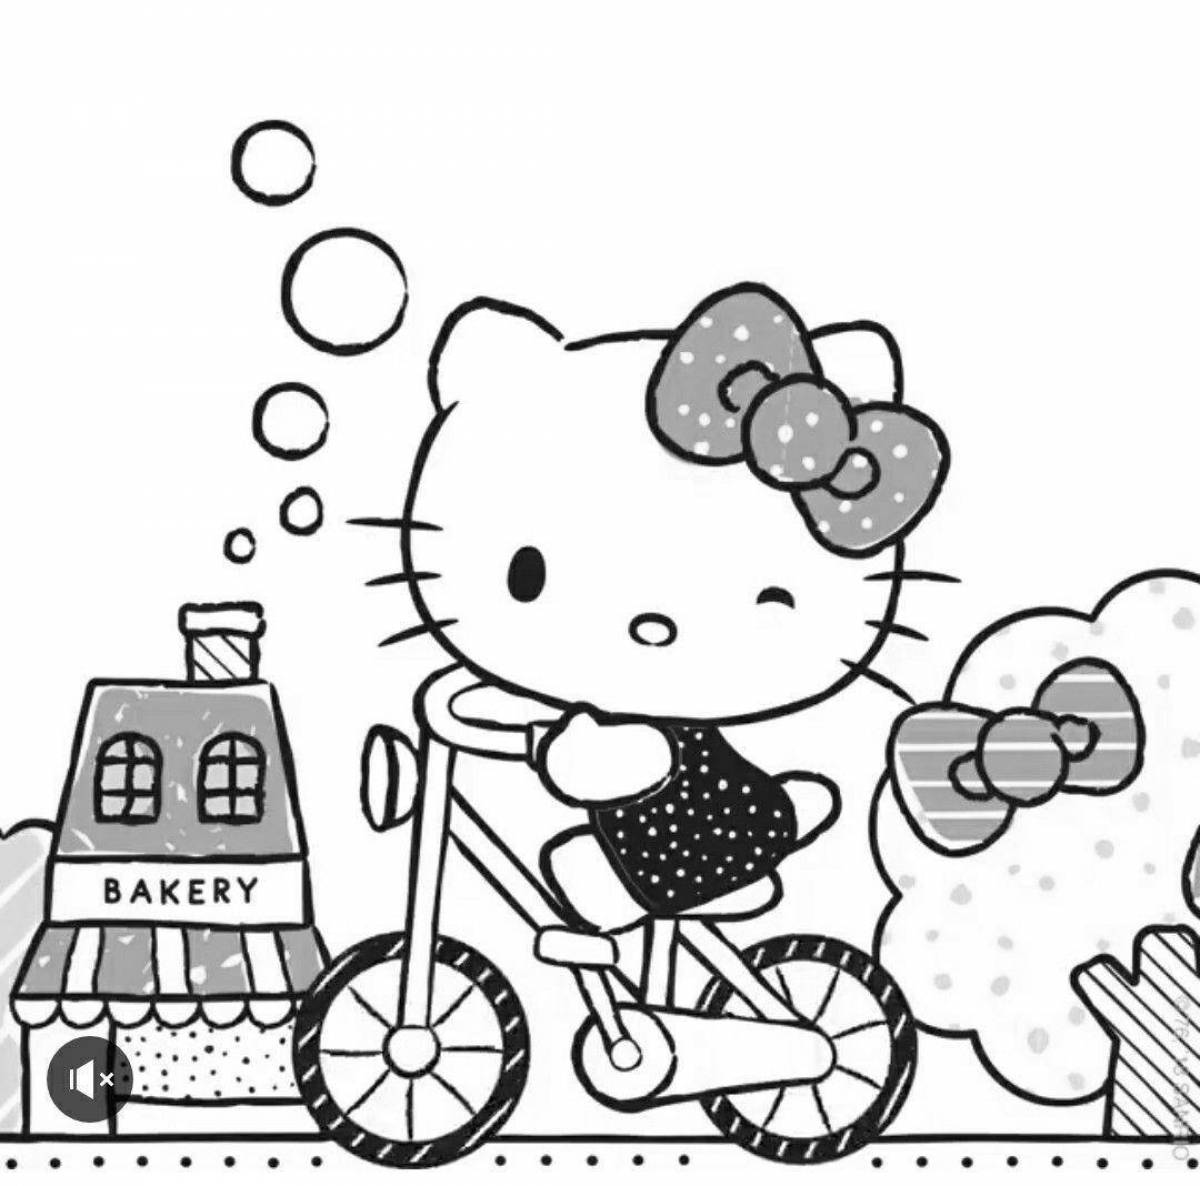 Pin by Milky way on Тоту in 2020 Kitty drawing, hello Kitty